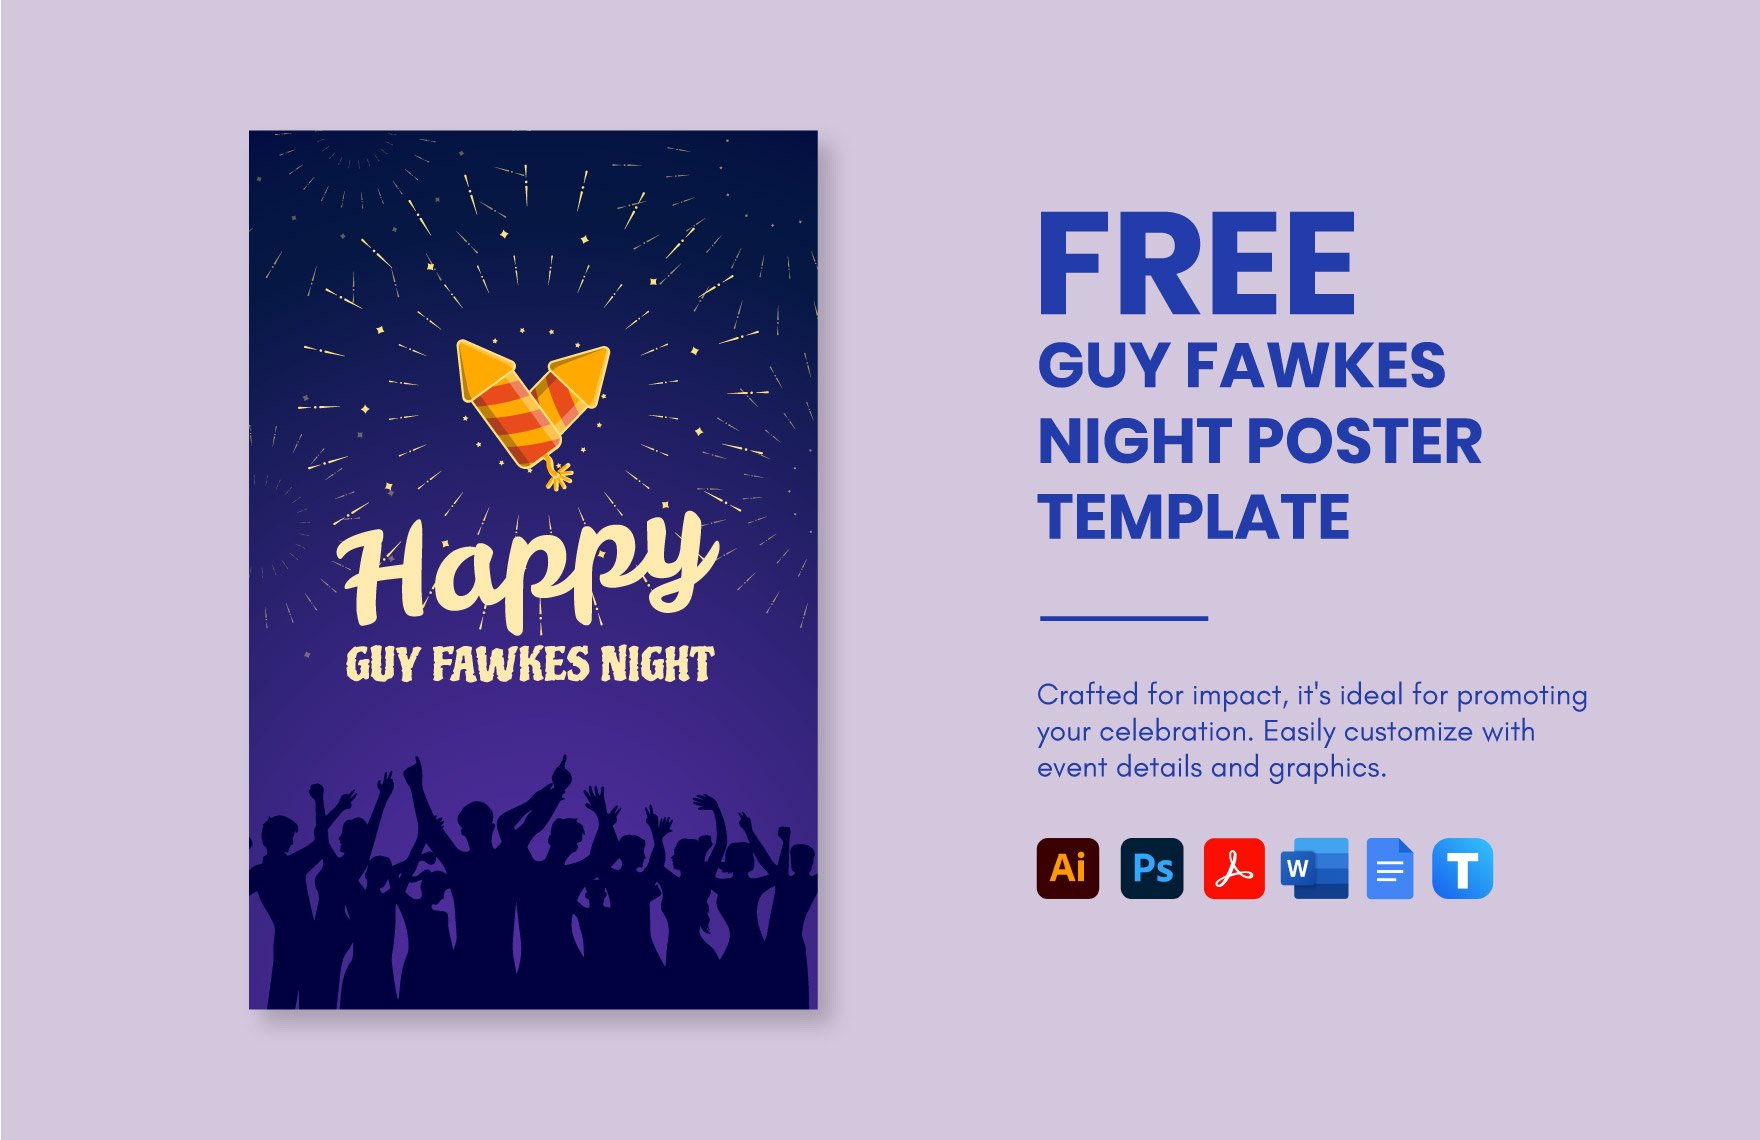 Free Guy Fawkes Night Poster Template in Word, Google Docs, PDF, Illustrator, PSD